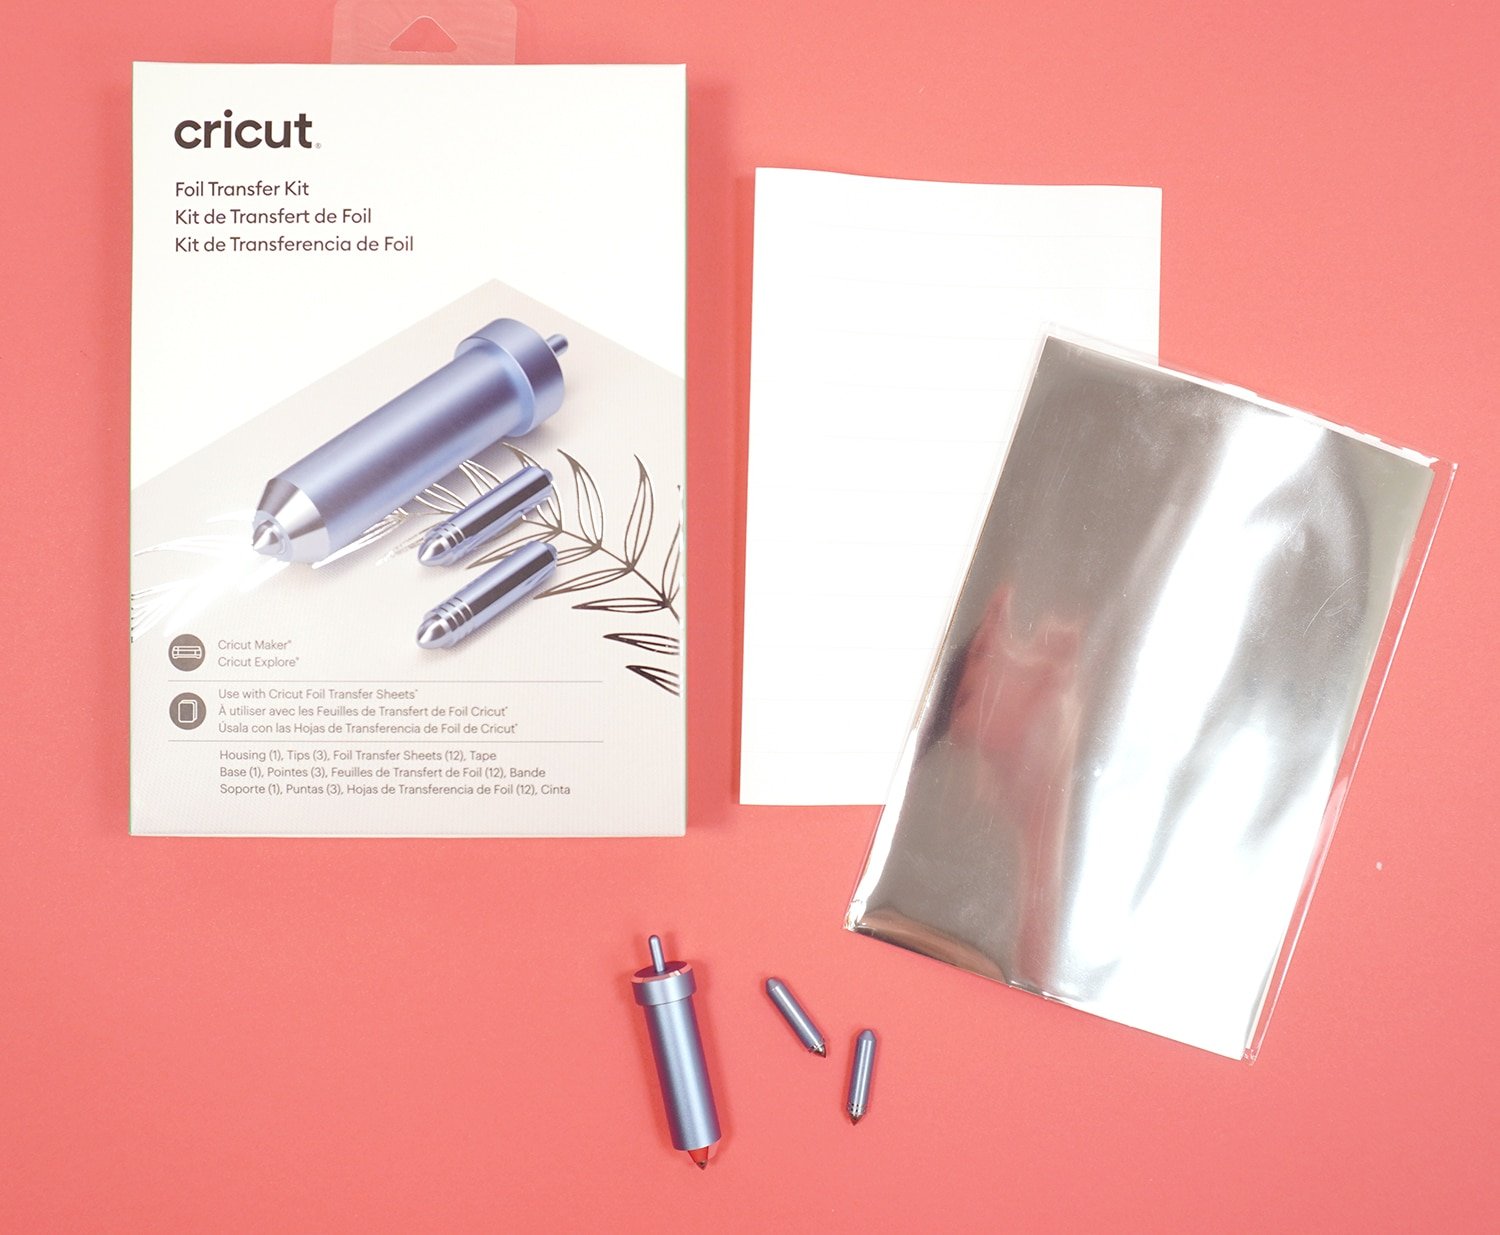 Cricut Foil Transfer Kit packaging, tool, tips, and silver foil on coral background